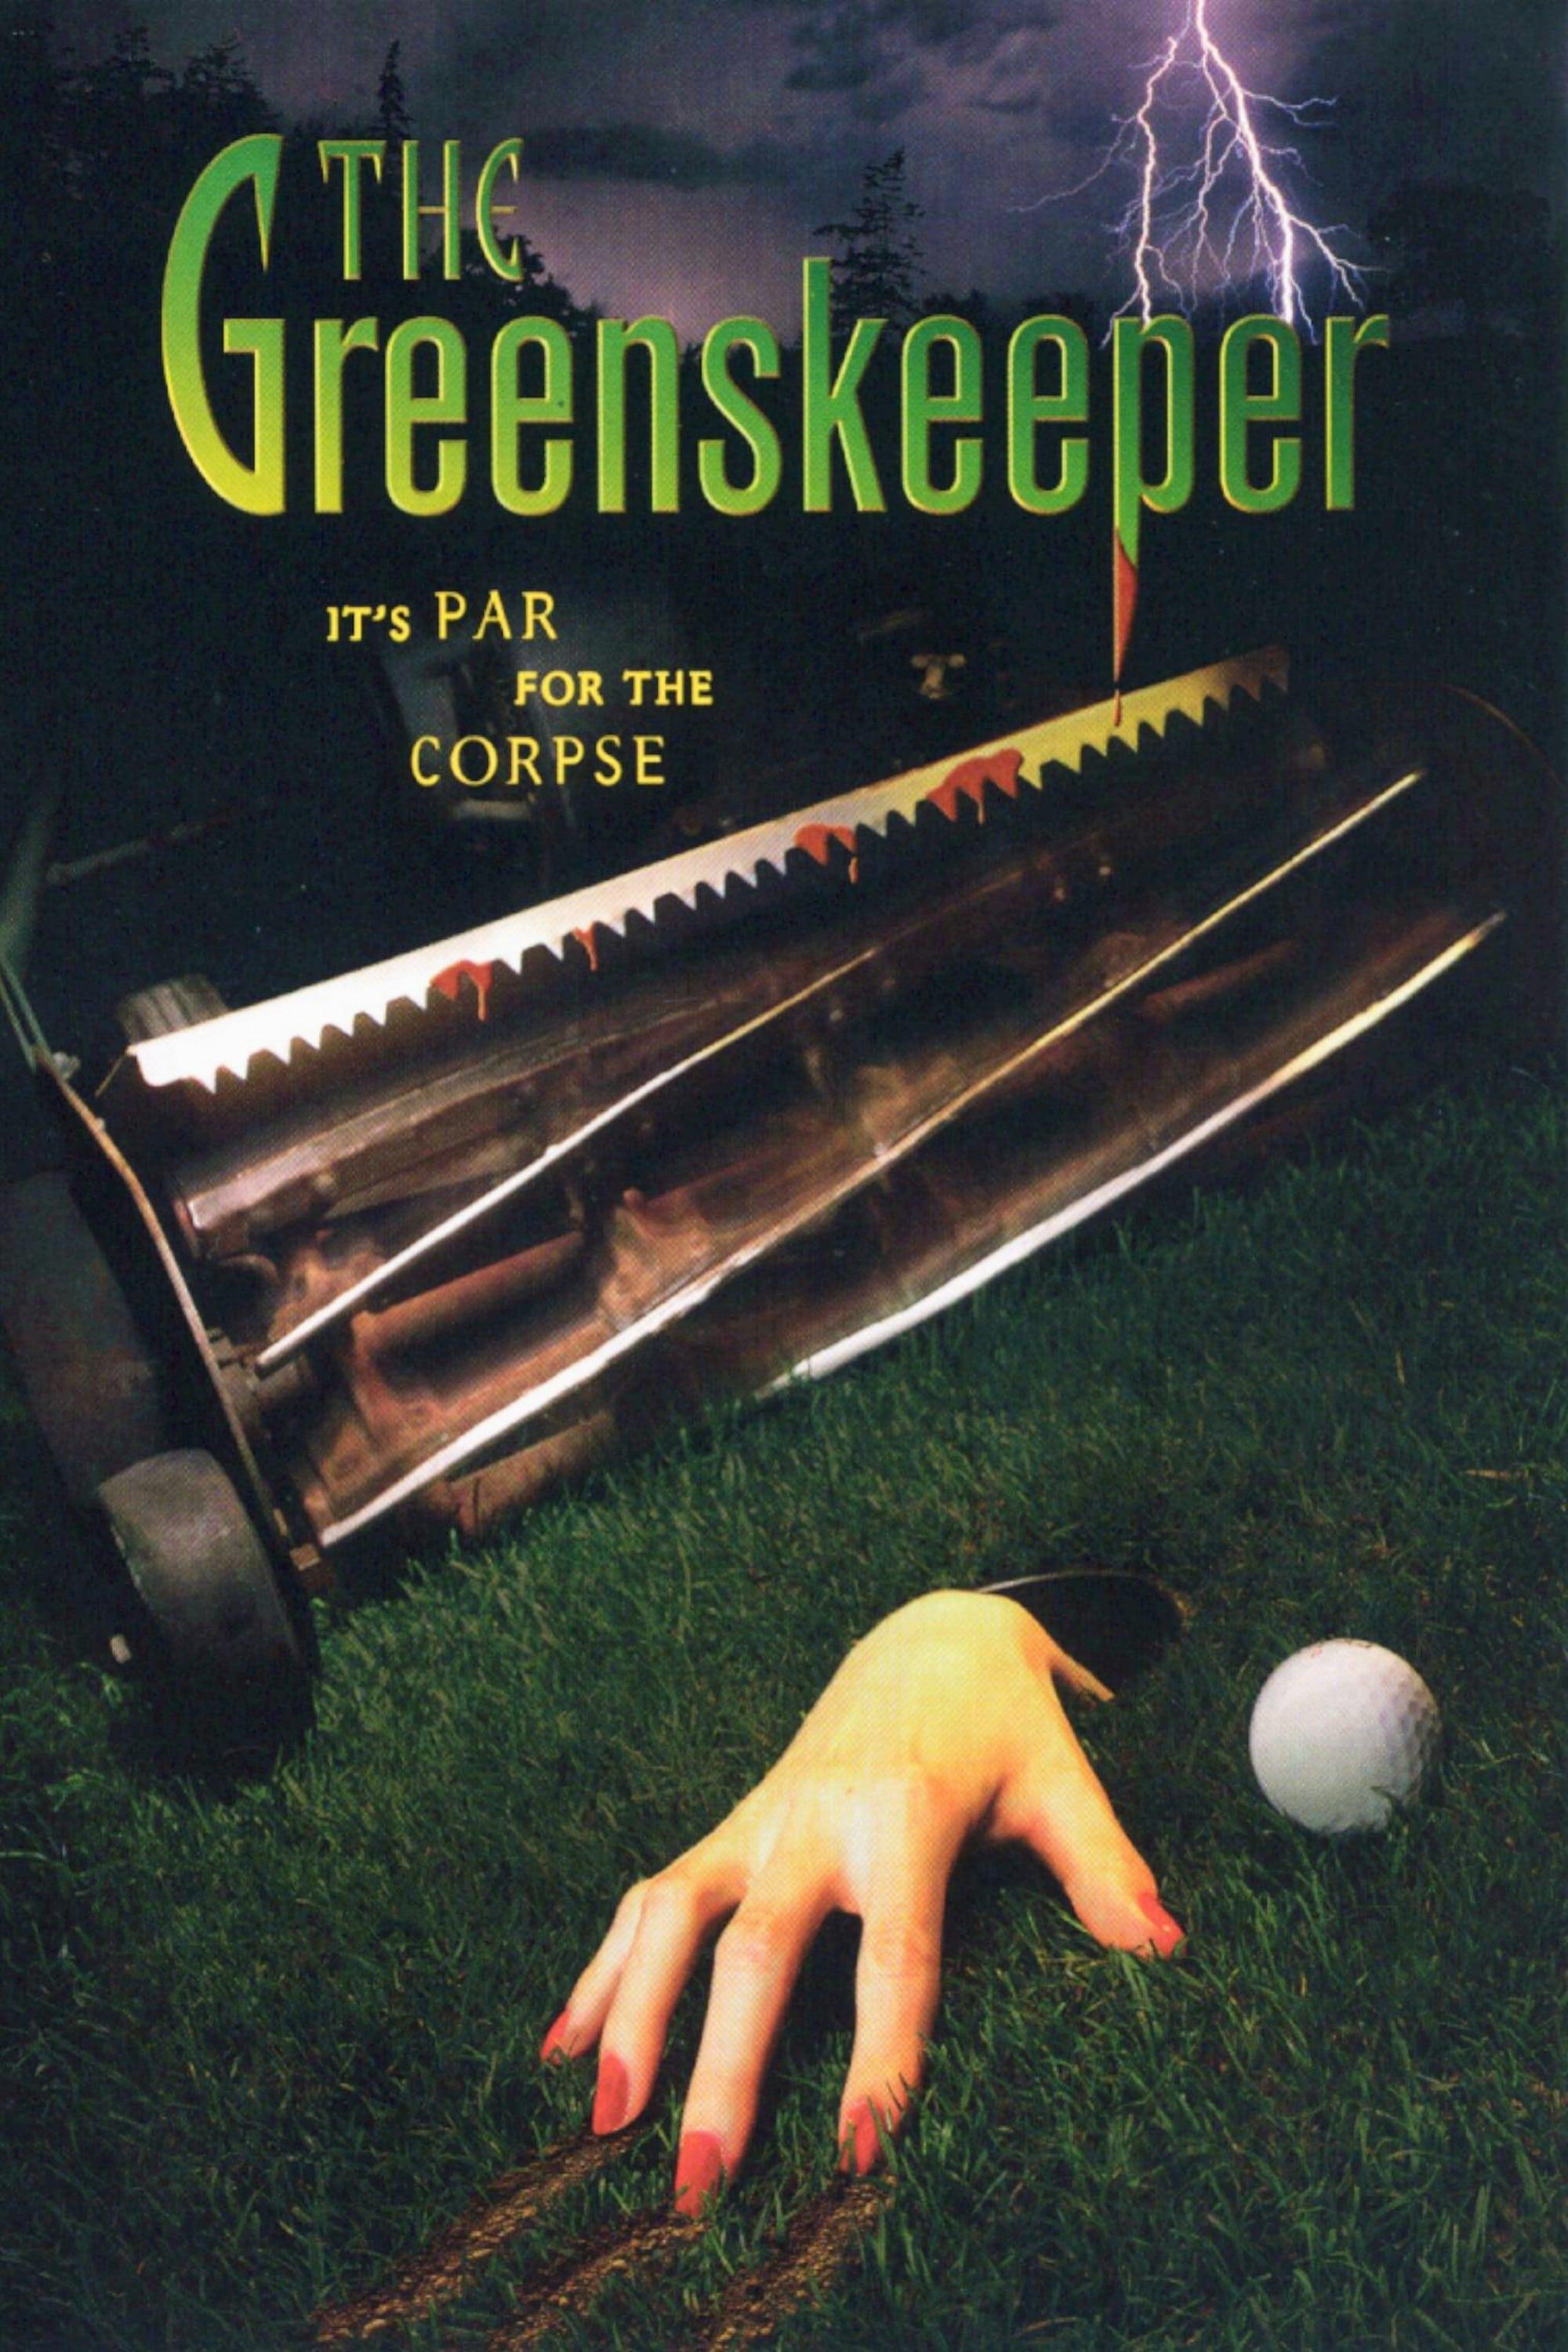 The Greenskeeper poster